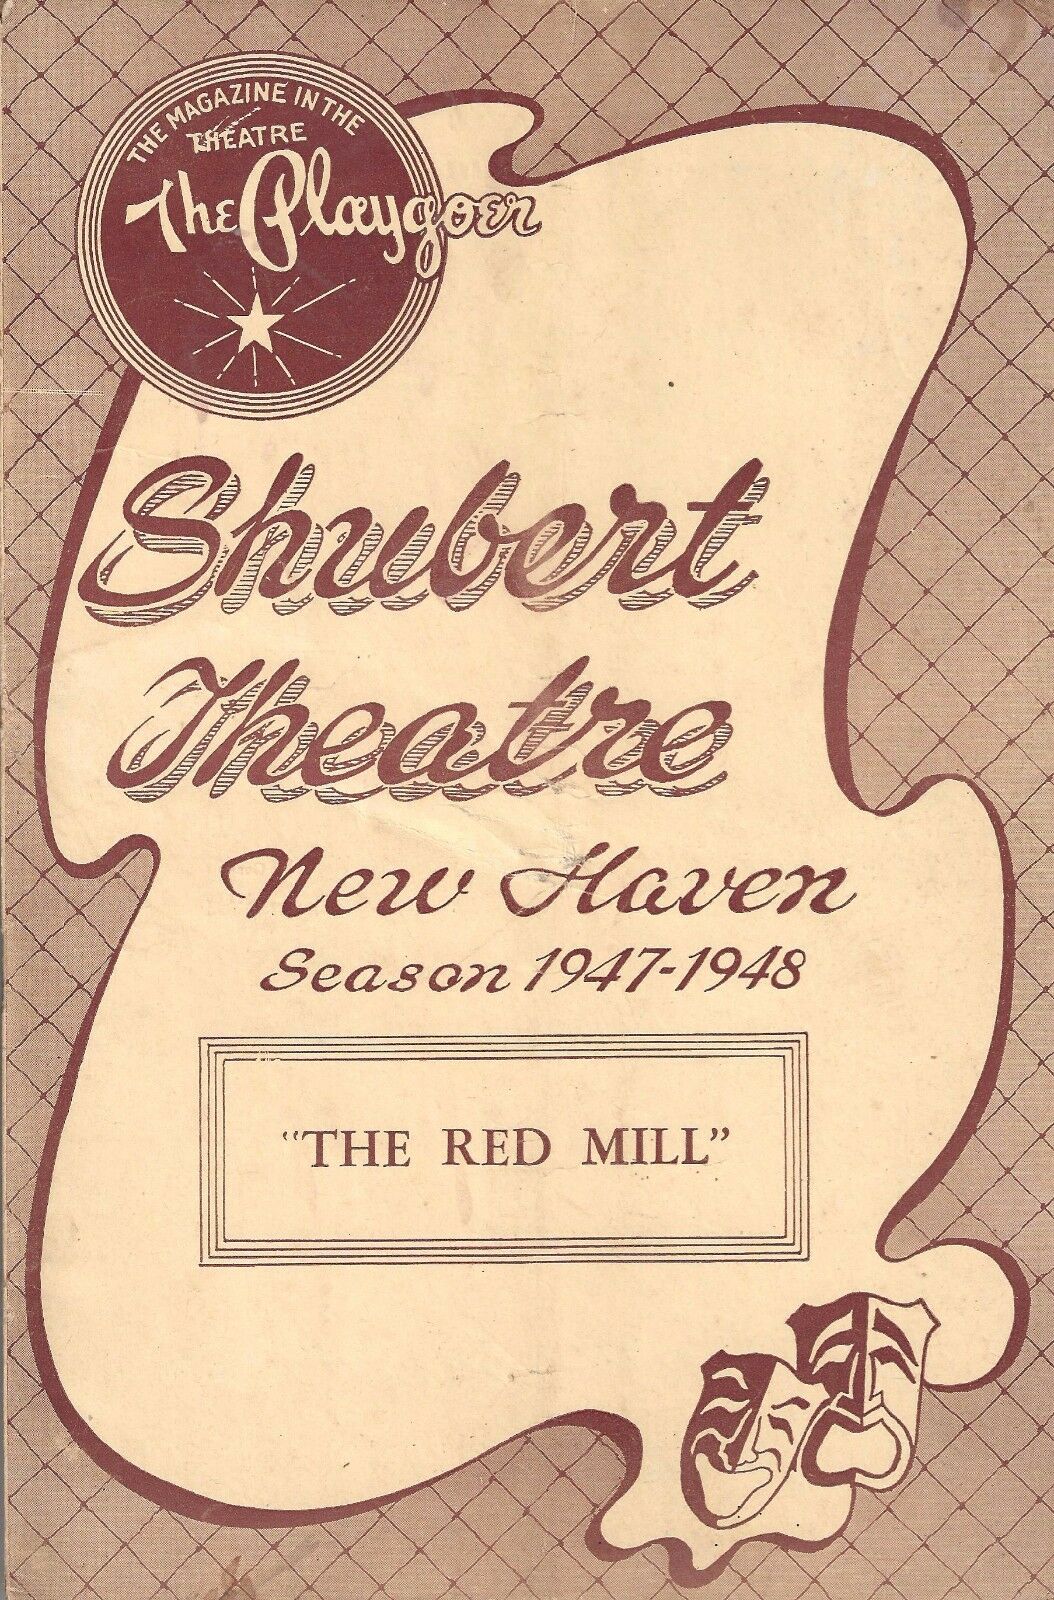 Victor Herbert "the Red Mill" Buster West / Pat Rooney, Jr. 1948 Playbill